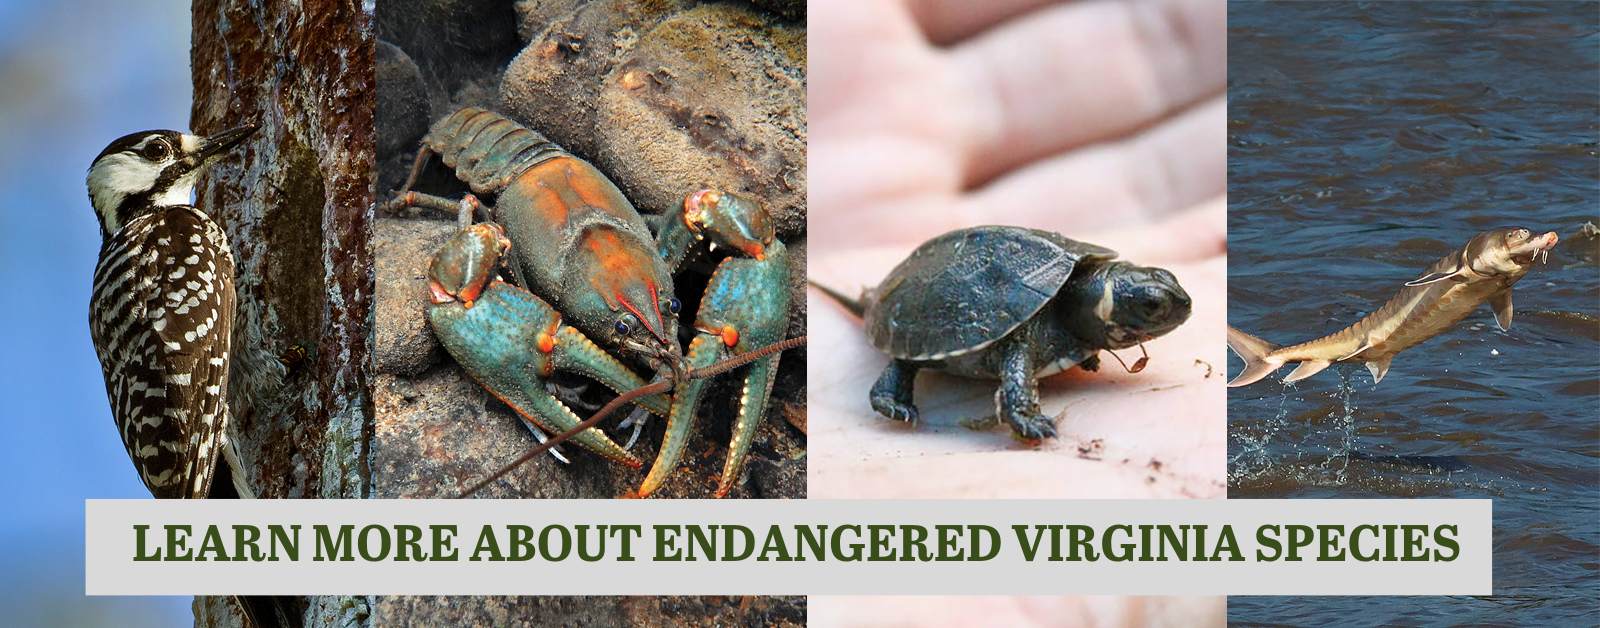 Four photos in a collage - a red-cockaded woodpecker on a tree, a Big Sandy crayfish under water on ricks, a tiny baby bog turtle on a person's hand, and a sturgeon fish leaping out of the water. A banner of text reads "Learn more about endangered Virginia species."